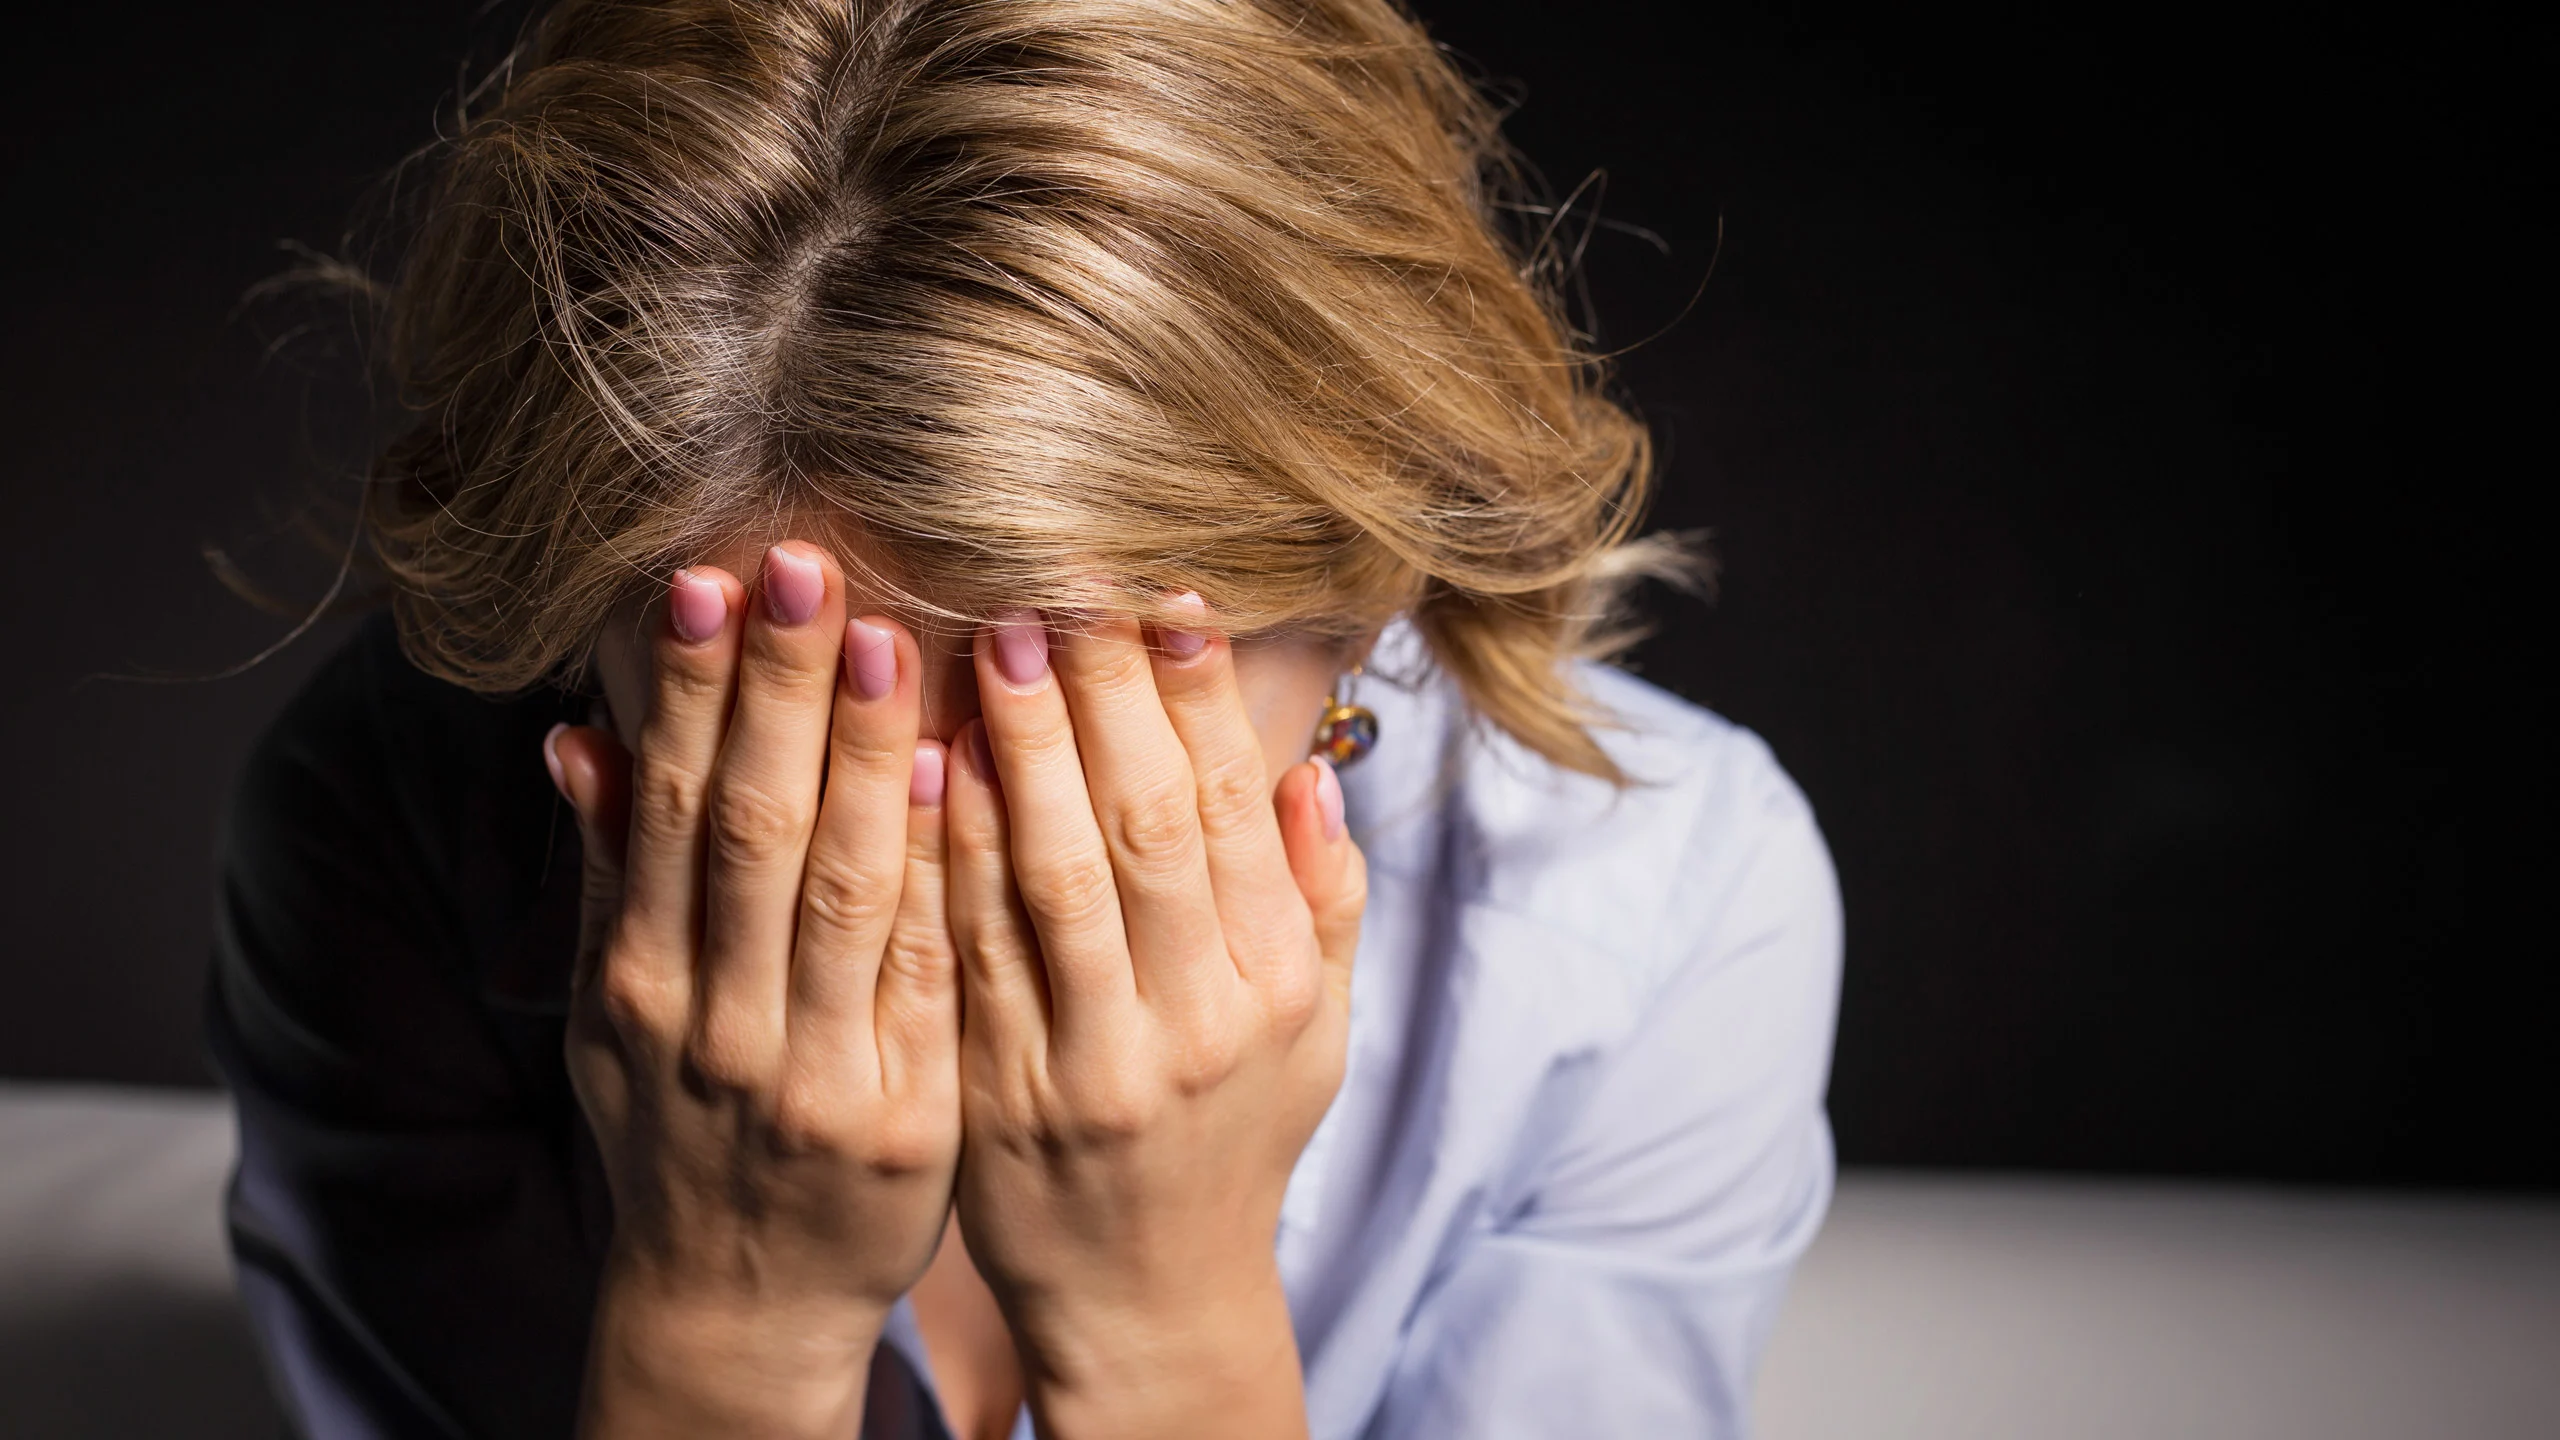 6 Major Types of Anxiety Disorders – Which Do You Have?